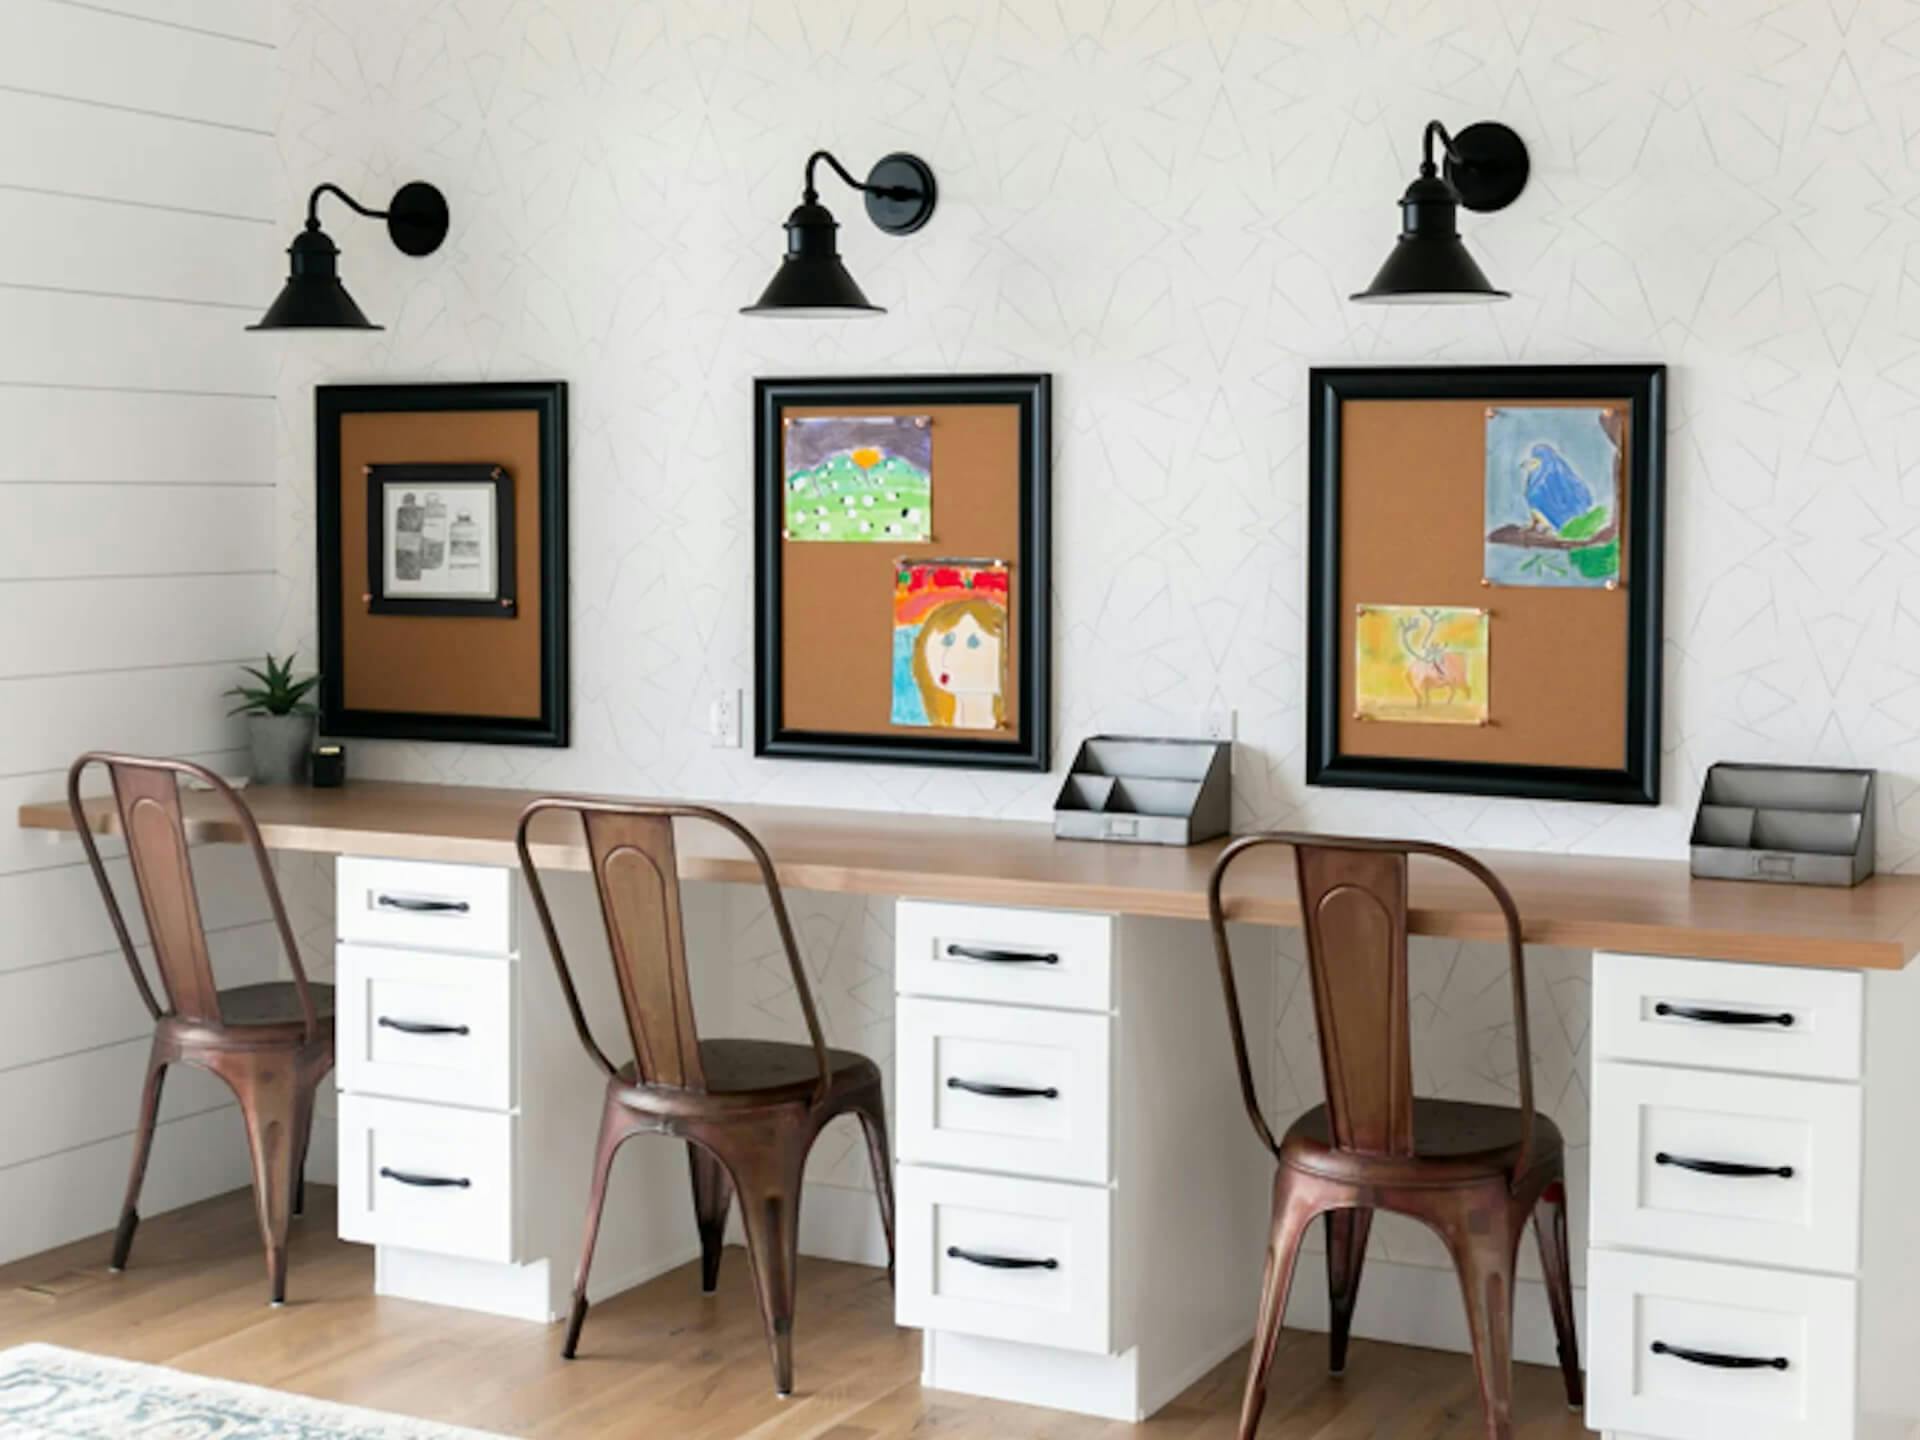 Built in desks against a wall with corkboards of children's art and Gowler wall sconces above each